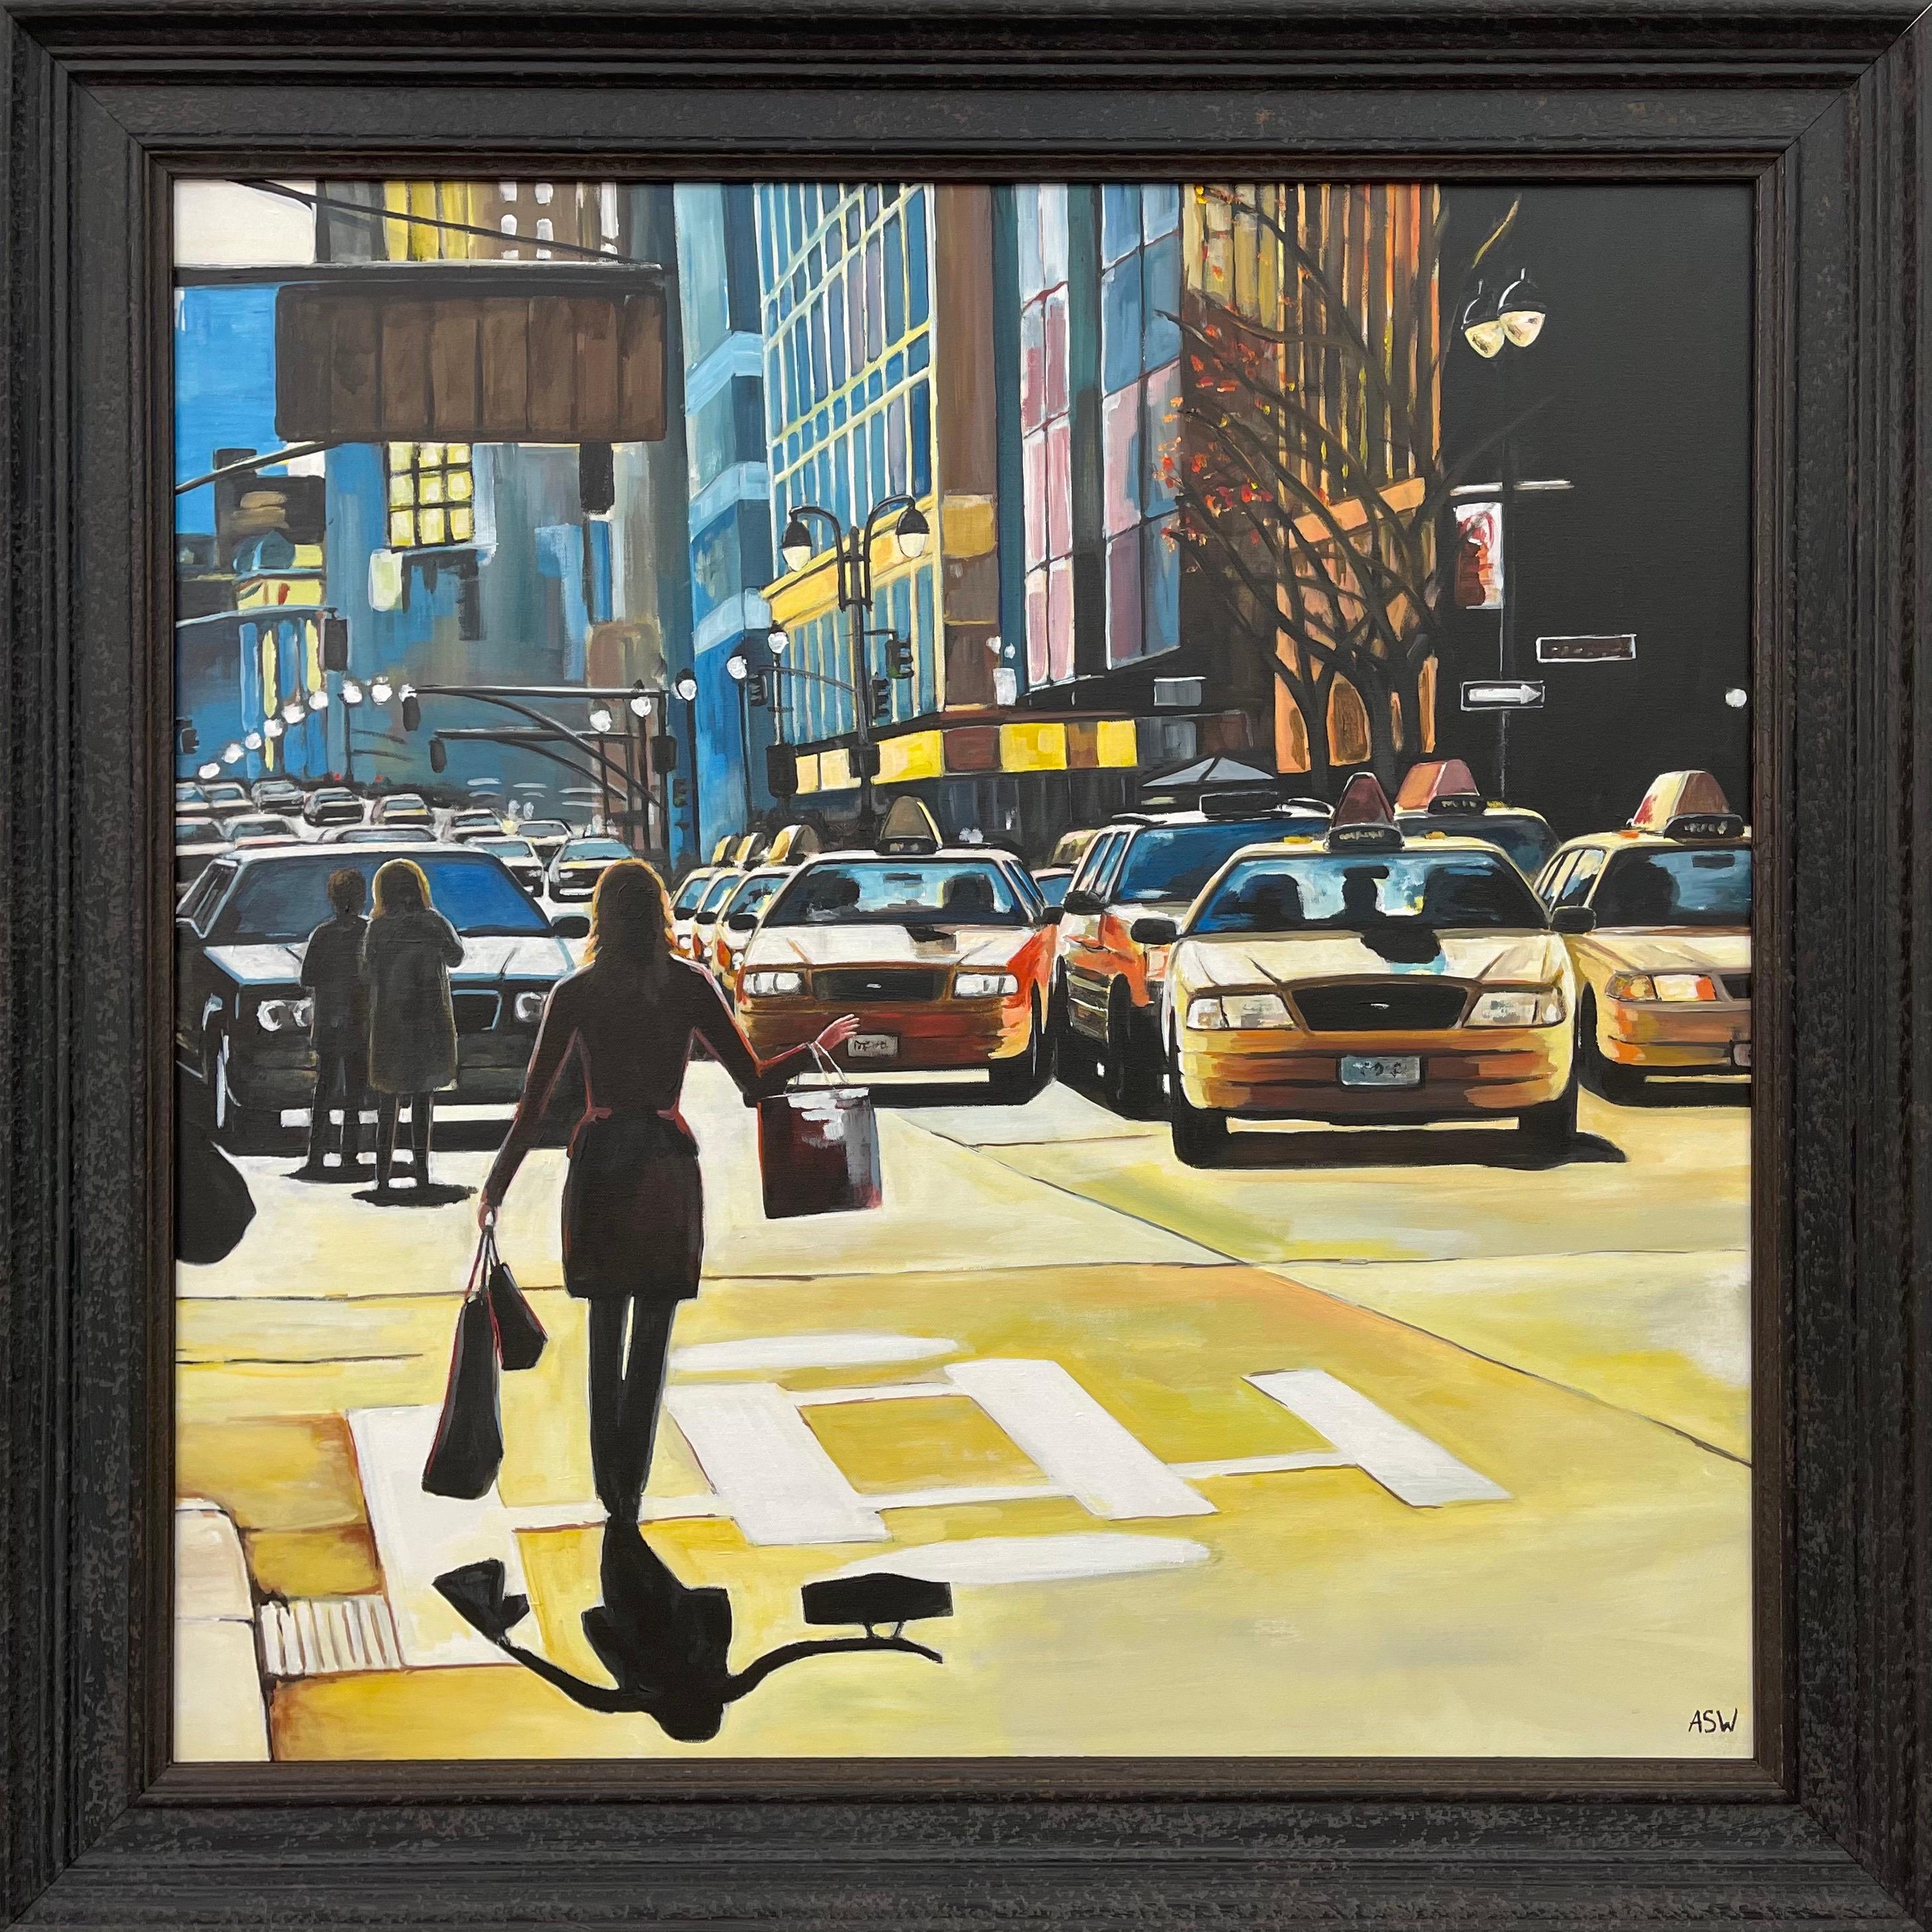 Angela Wakefield Landscape Painting - Female Figure Shopping in New York City Sunshine by Contemporary British Artist